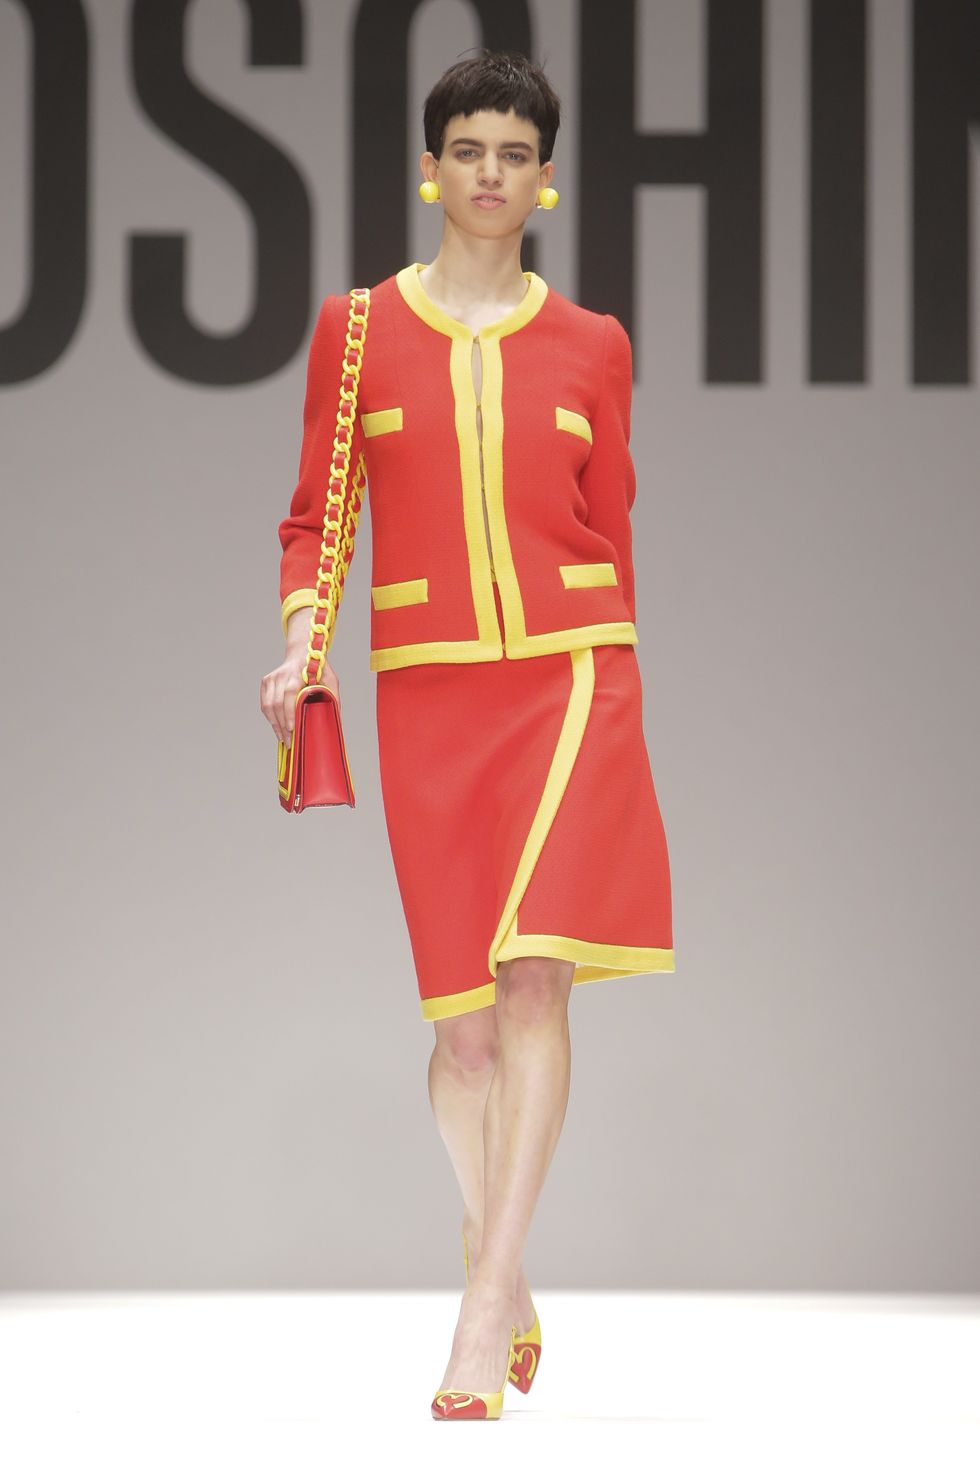 model-walks-the-runway-during-moschino-show-as-part-of-news-photo-1679325587.jpg